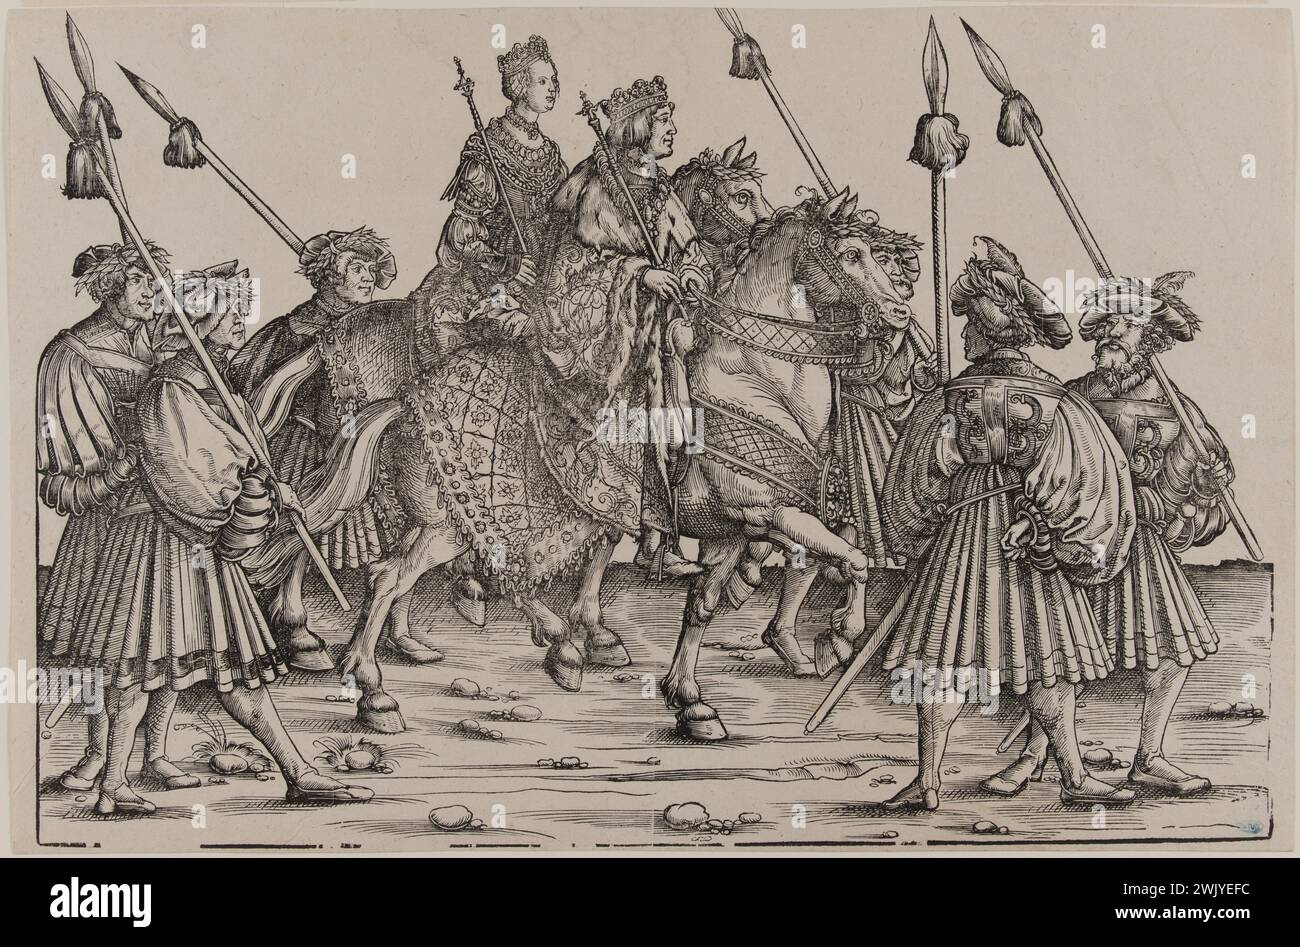 Hans Burgkmair, known as the old (1473-1531). The triumphant procession of the Emperor Maximilien I: procession of a king and a queen in (Dornik-Eger 36, Bartsch 81). Xylography, 1512-1519. Museum of Fine Arts of the City of Paris, Petit Palais. Drawing, emperor, history, illustration, serious board, triumph, 16th 16th XVI 16th 16th 16th century, xylography, engraving Stock Photo